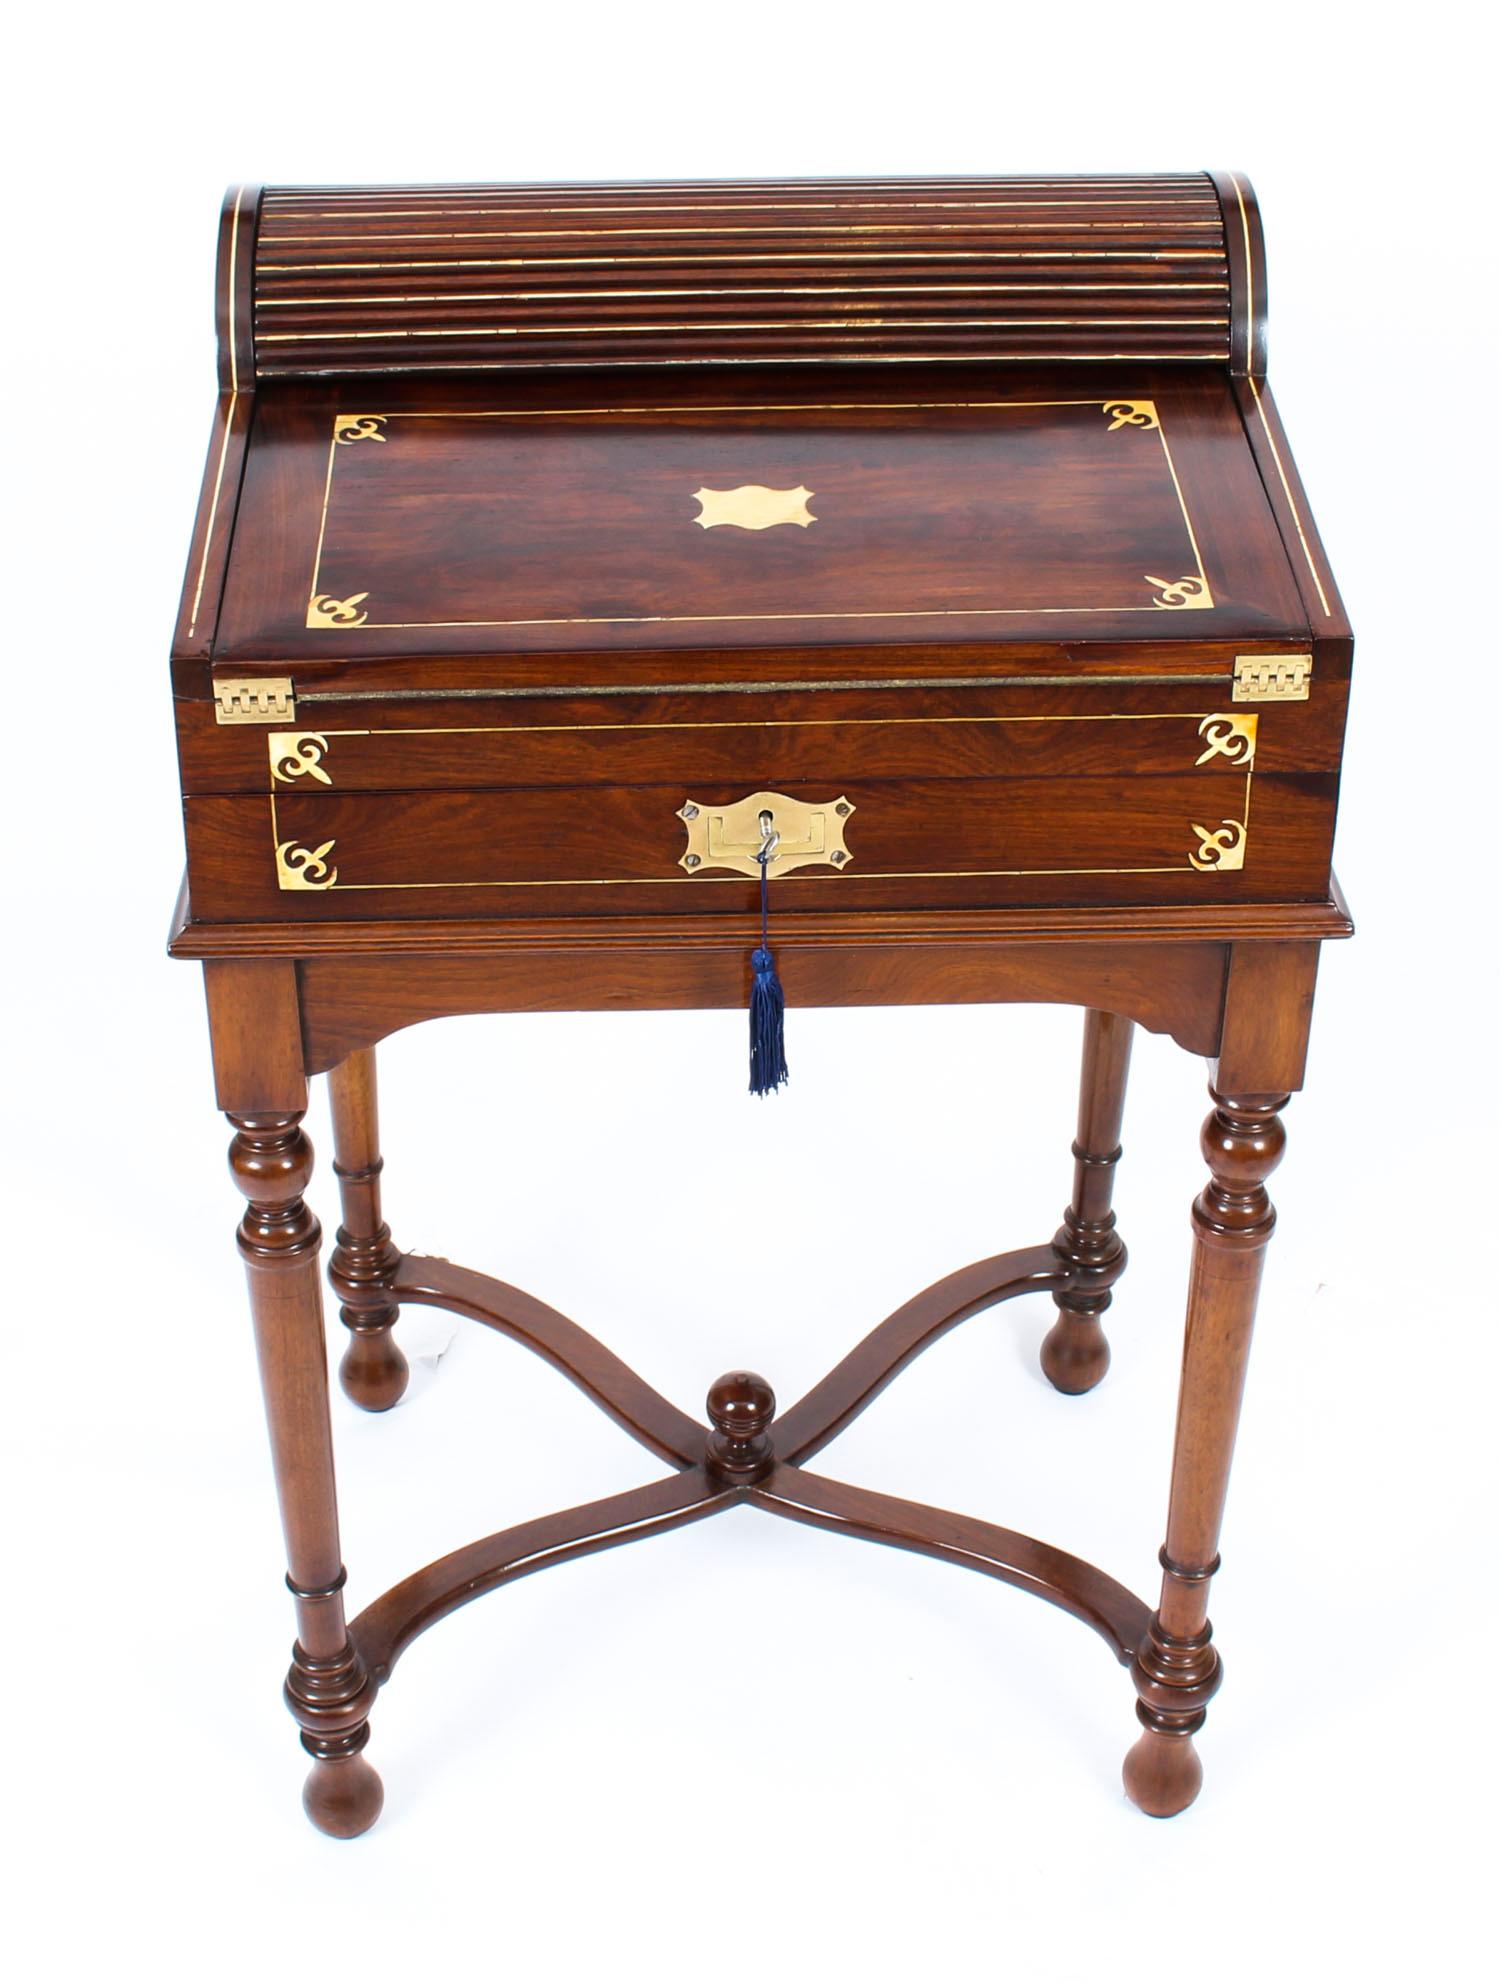 Fine quality Anglo-Indian Padouk tambour fall fronted Campaign writing slope on stand, circa 1840 in date.

This superb writing slope desk would have been made for military officers in the field.

Brass inlaid with striking cut brass decoration and